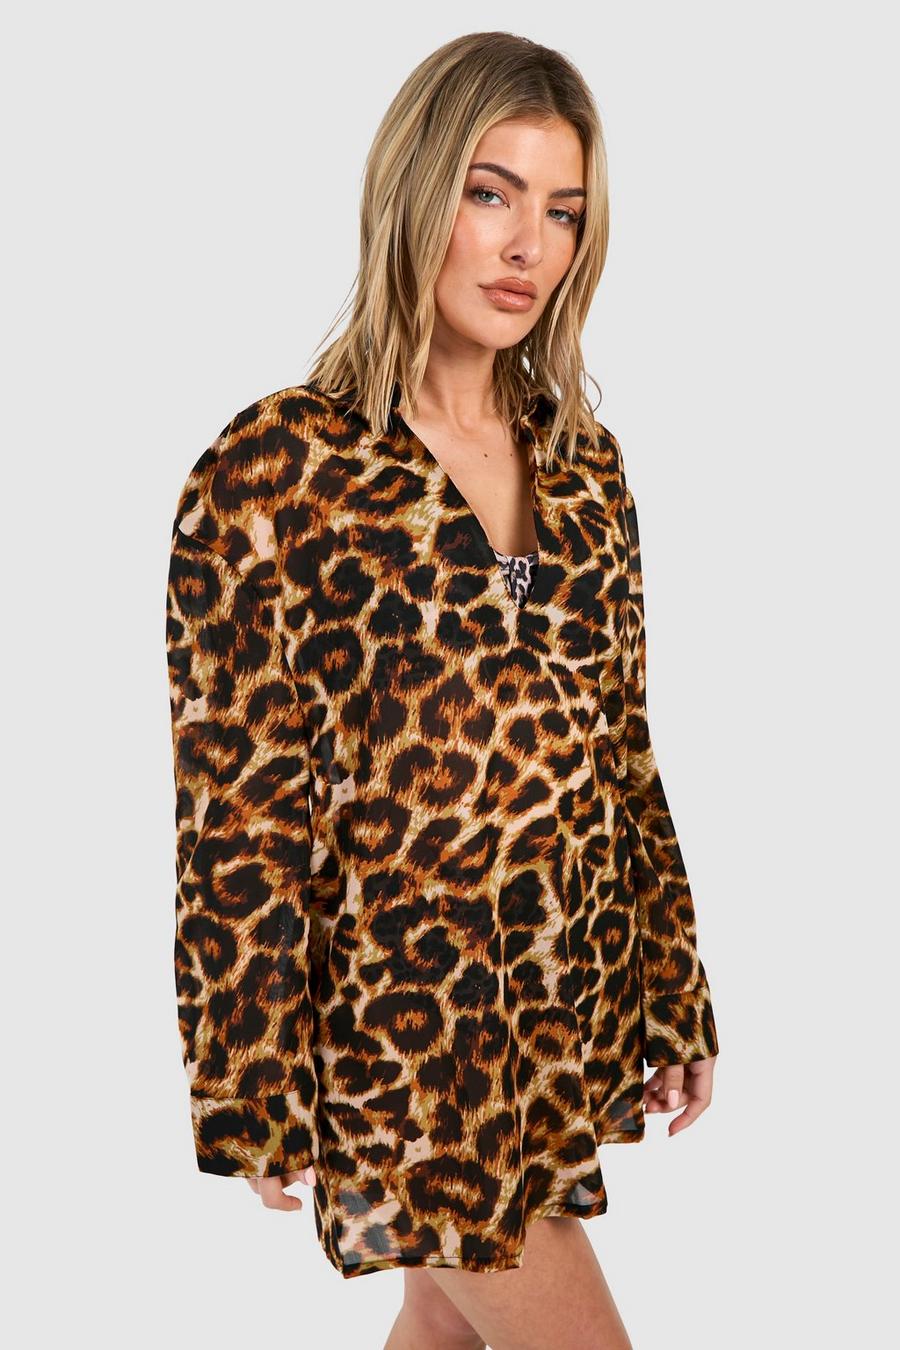 Brown Leopard Beach Cover-up Tunic